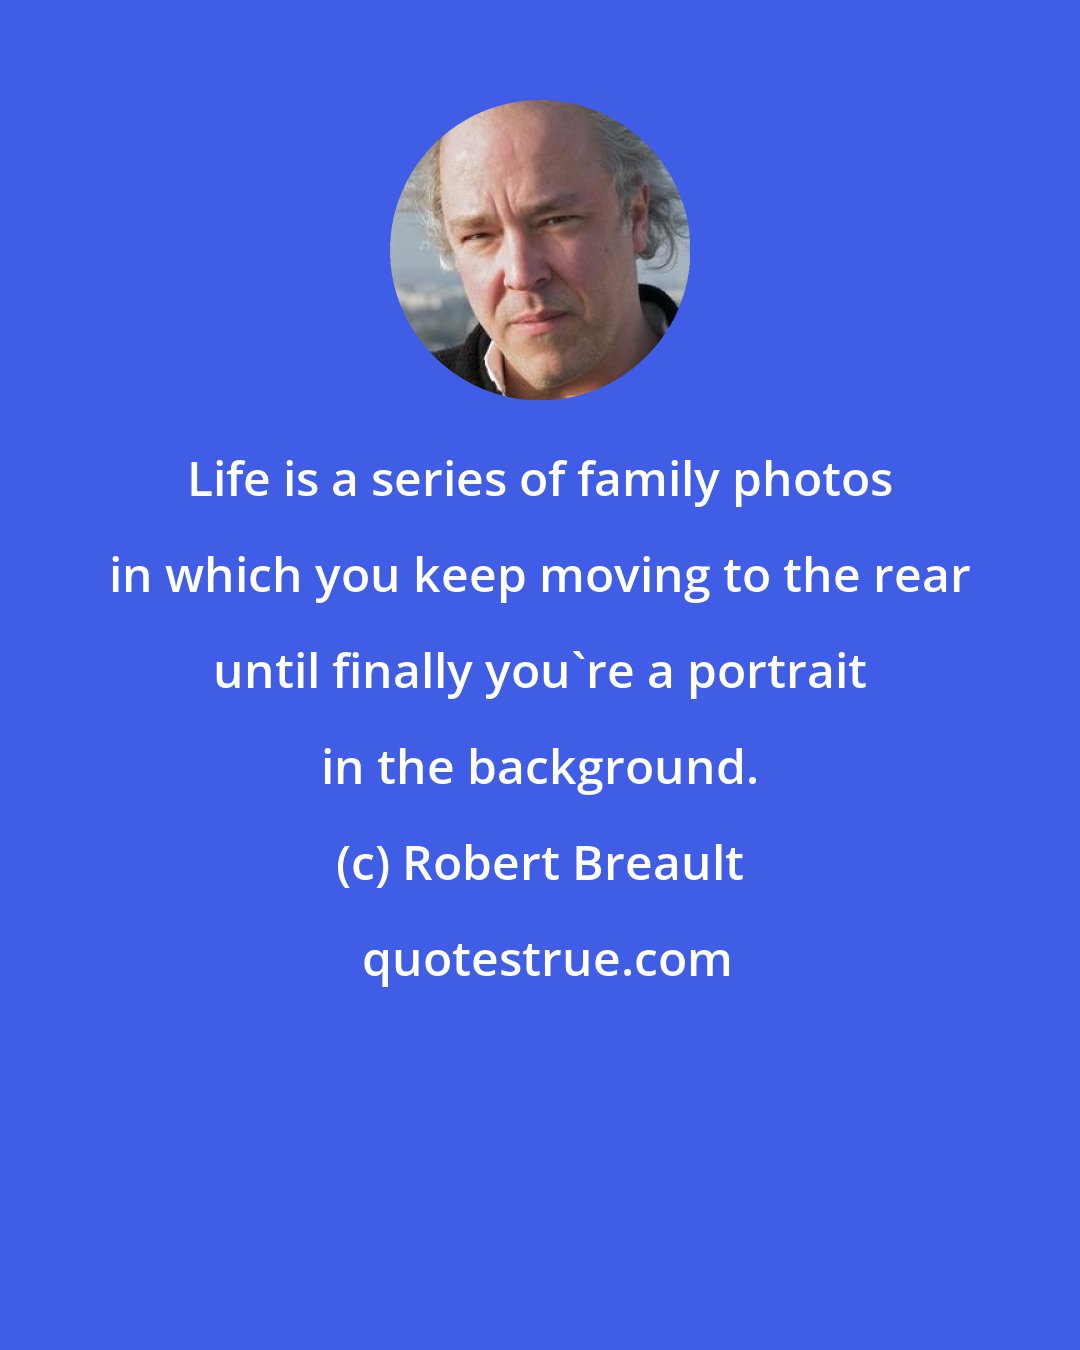 Robert Breault: Life is a series of family photos in which you keep moving to the rear until finally you're a portrait in the background.